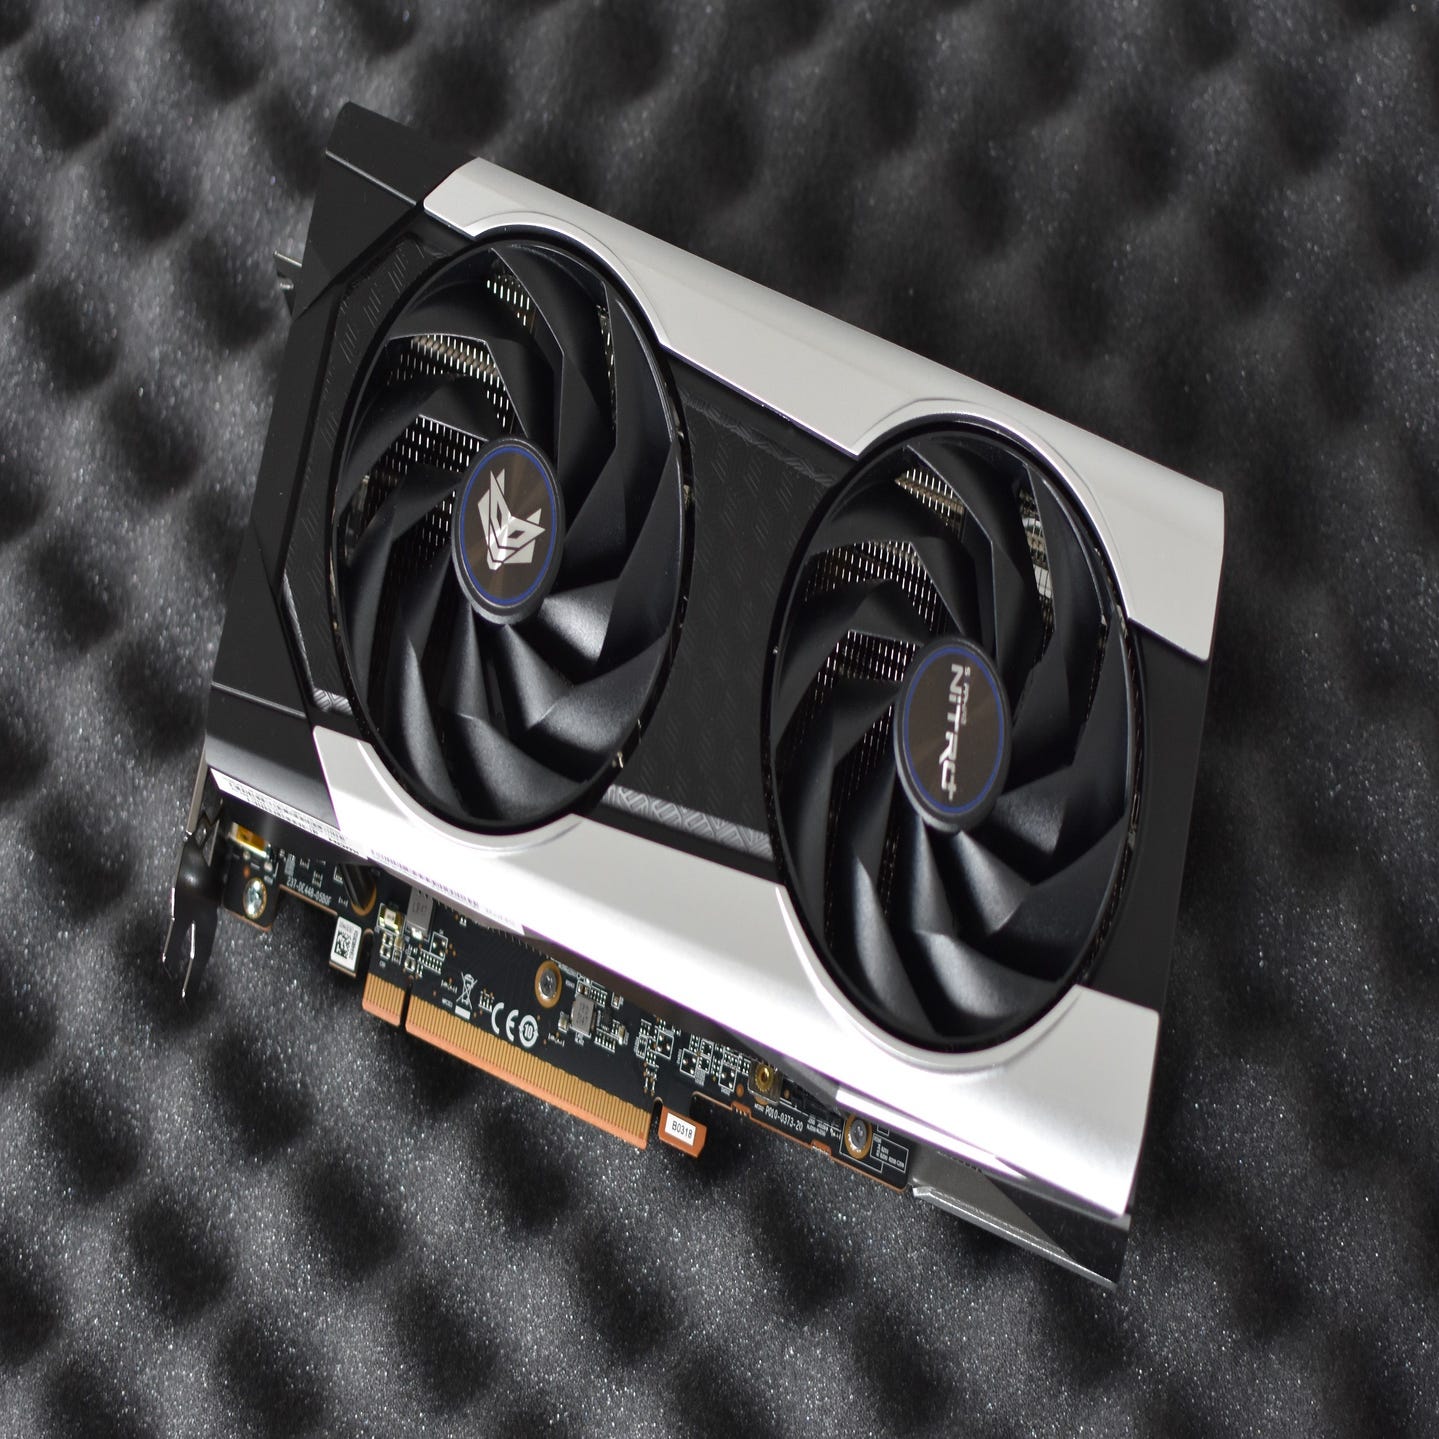 Is the Radeon RX 6650 XT worth buying this Holiday Sale?